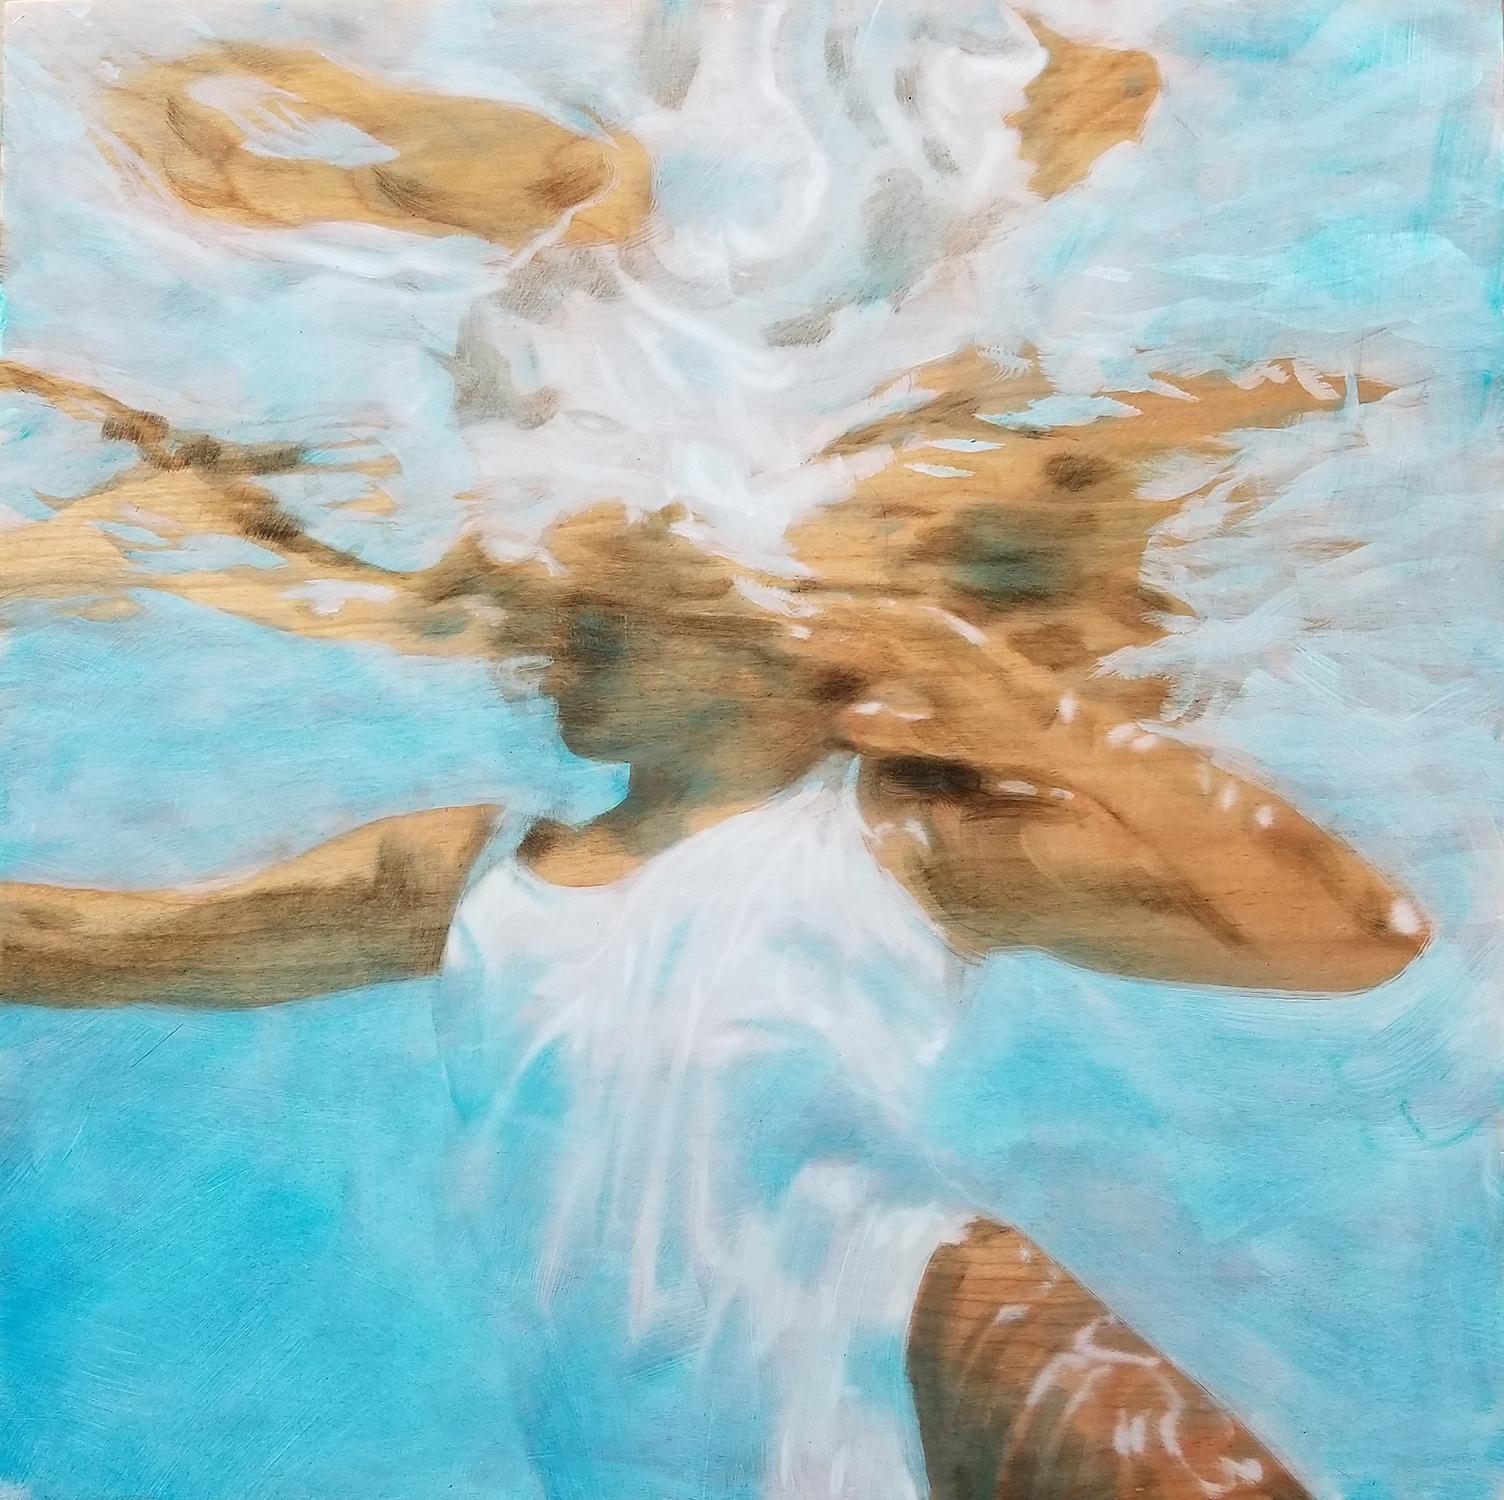 Carol Bennett Figurative Painting - "Titanium" oil painting of a woman in a white swimsuit in blue pool & reflection